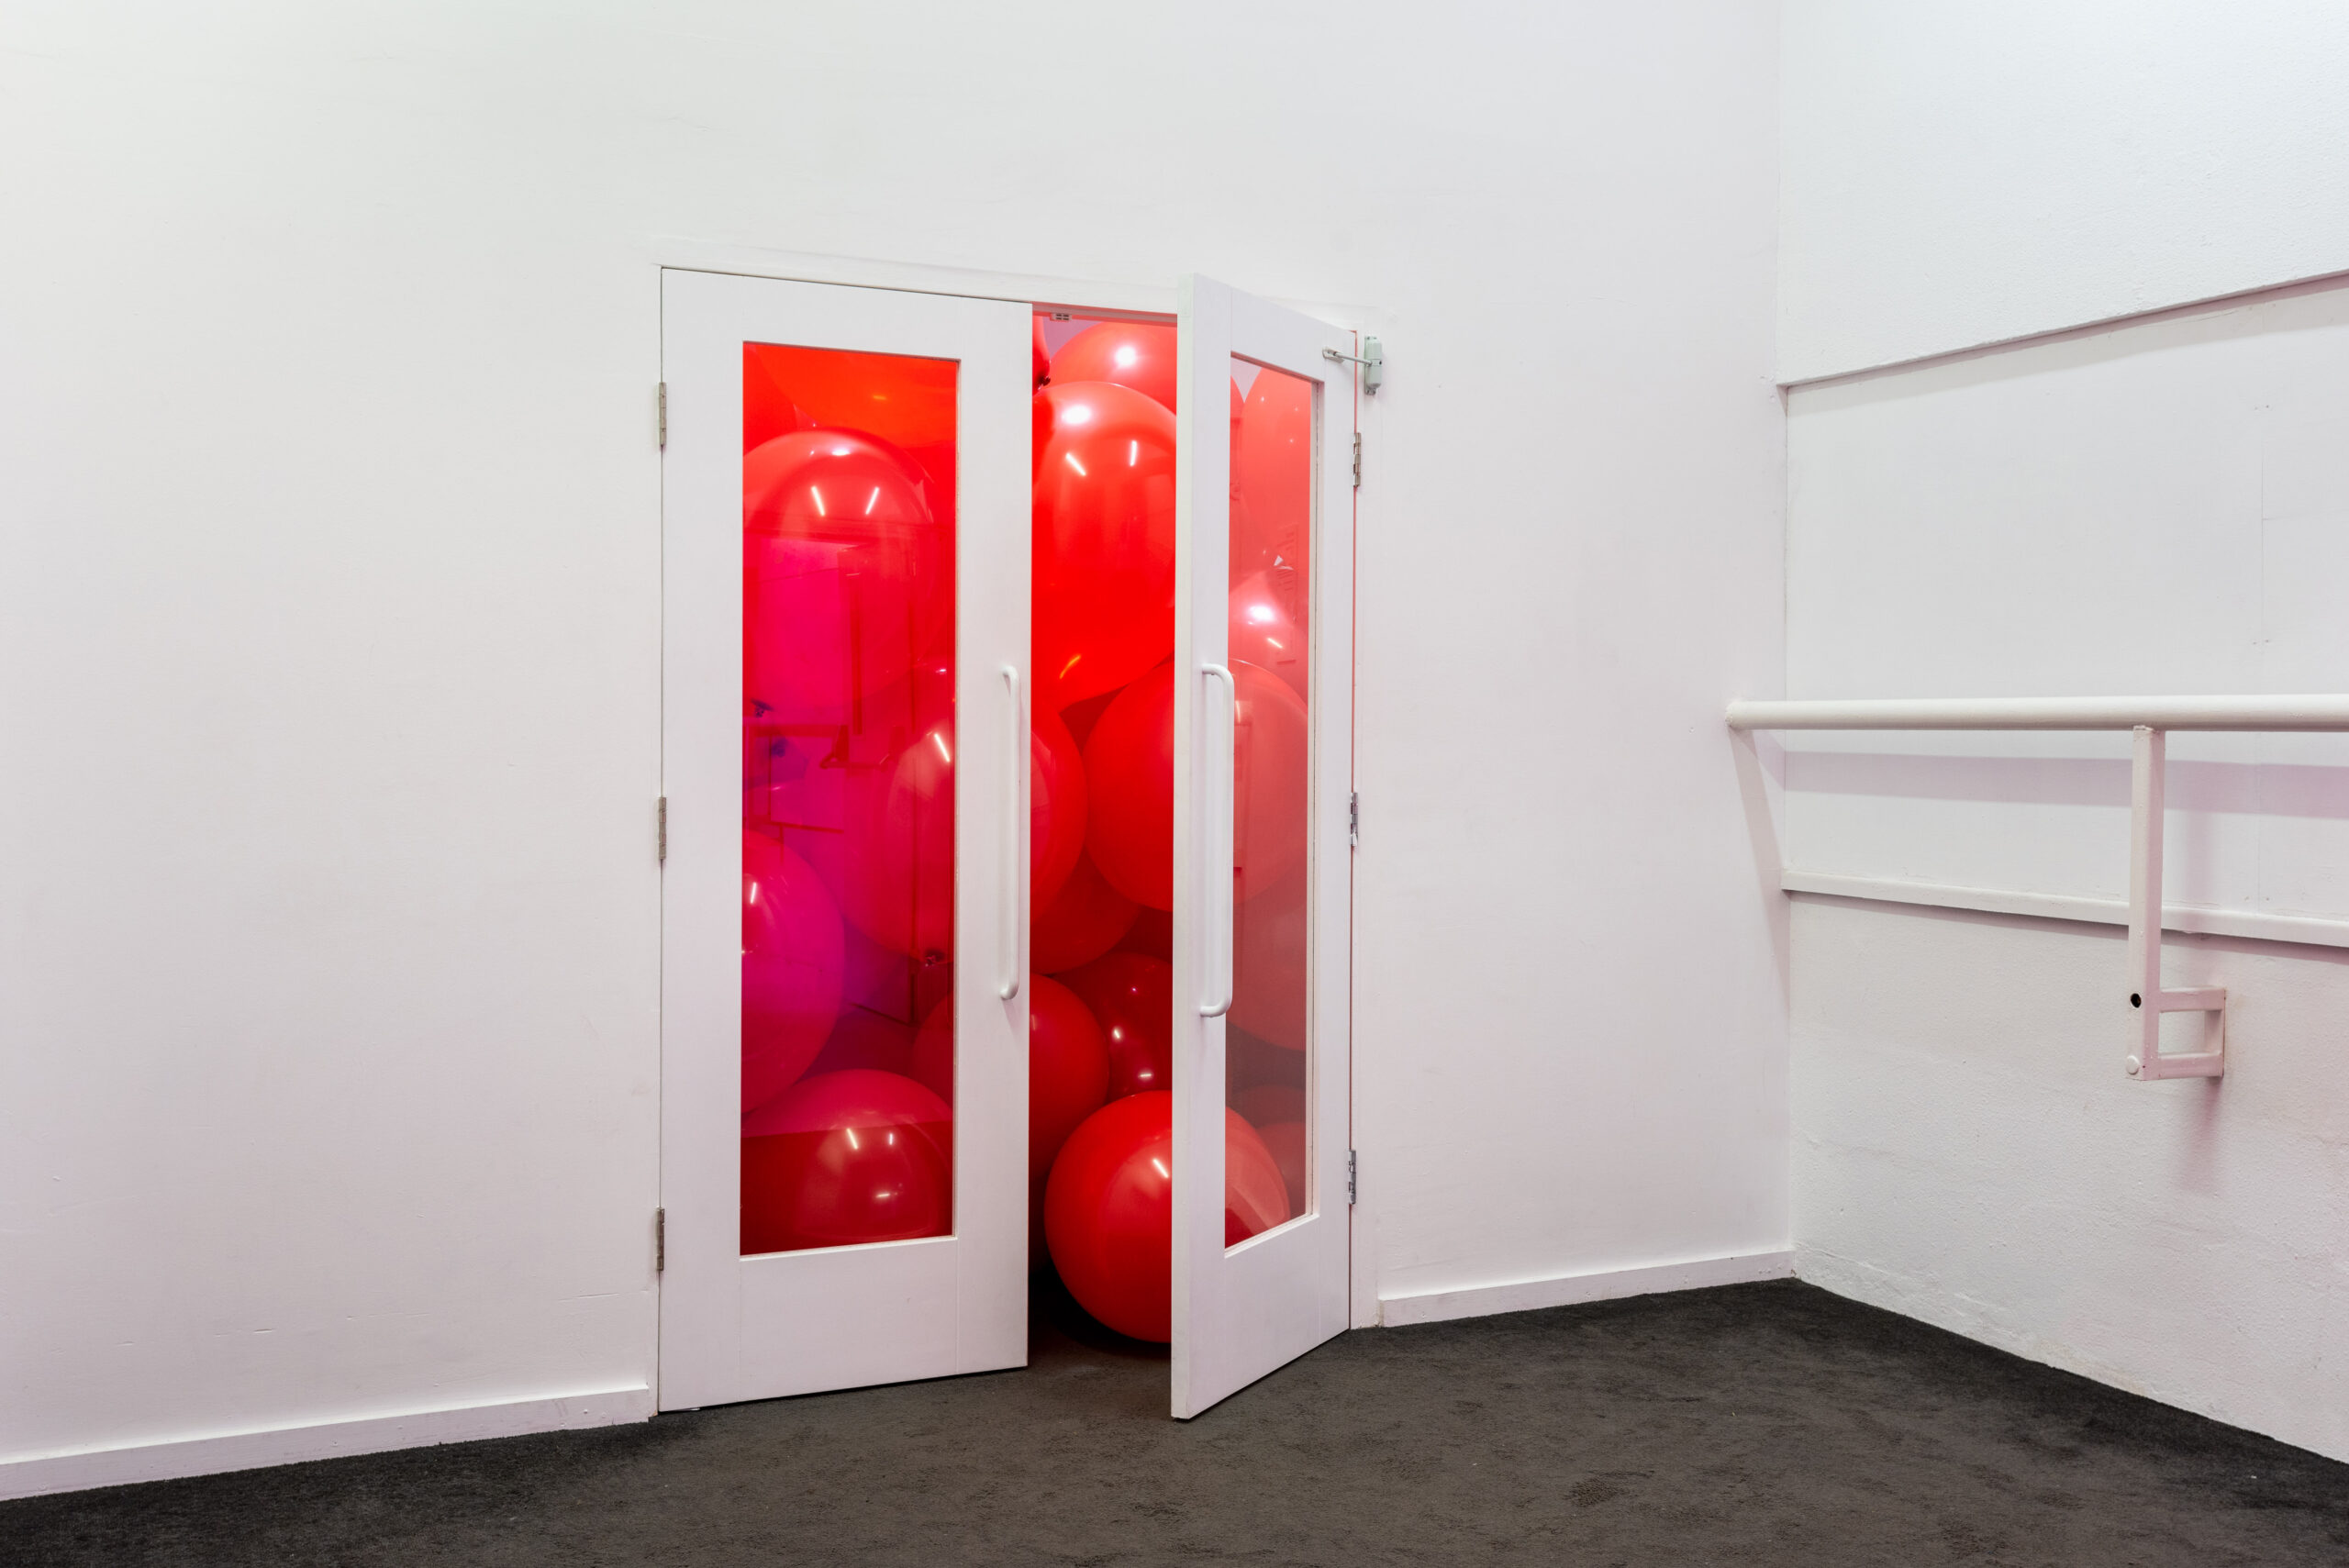 ID: a pair of glass double-doors are left slightly ajar on an expansive white wall. Behind the glass doors there are hundreds of large red balloons that completely fill the view into the room.